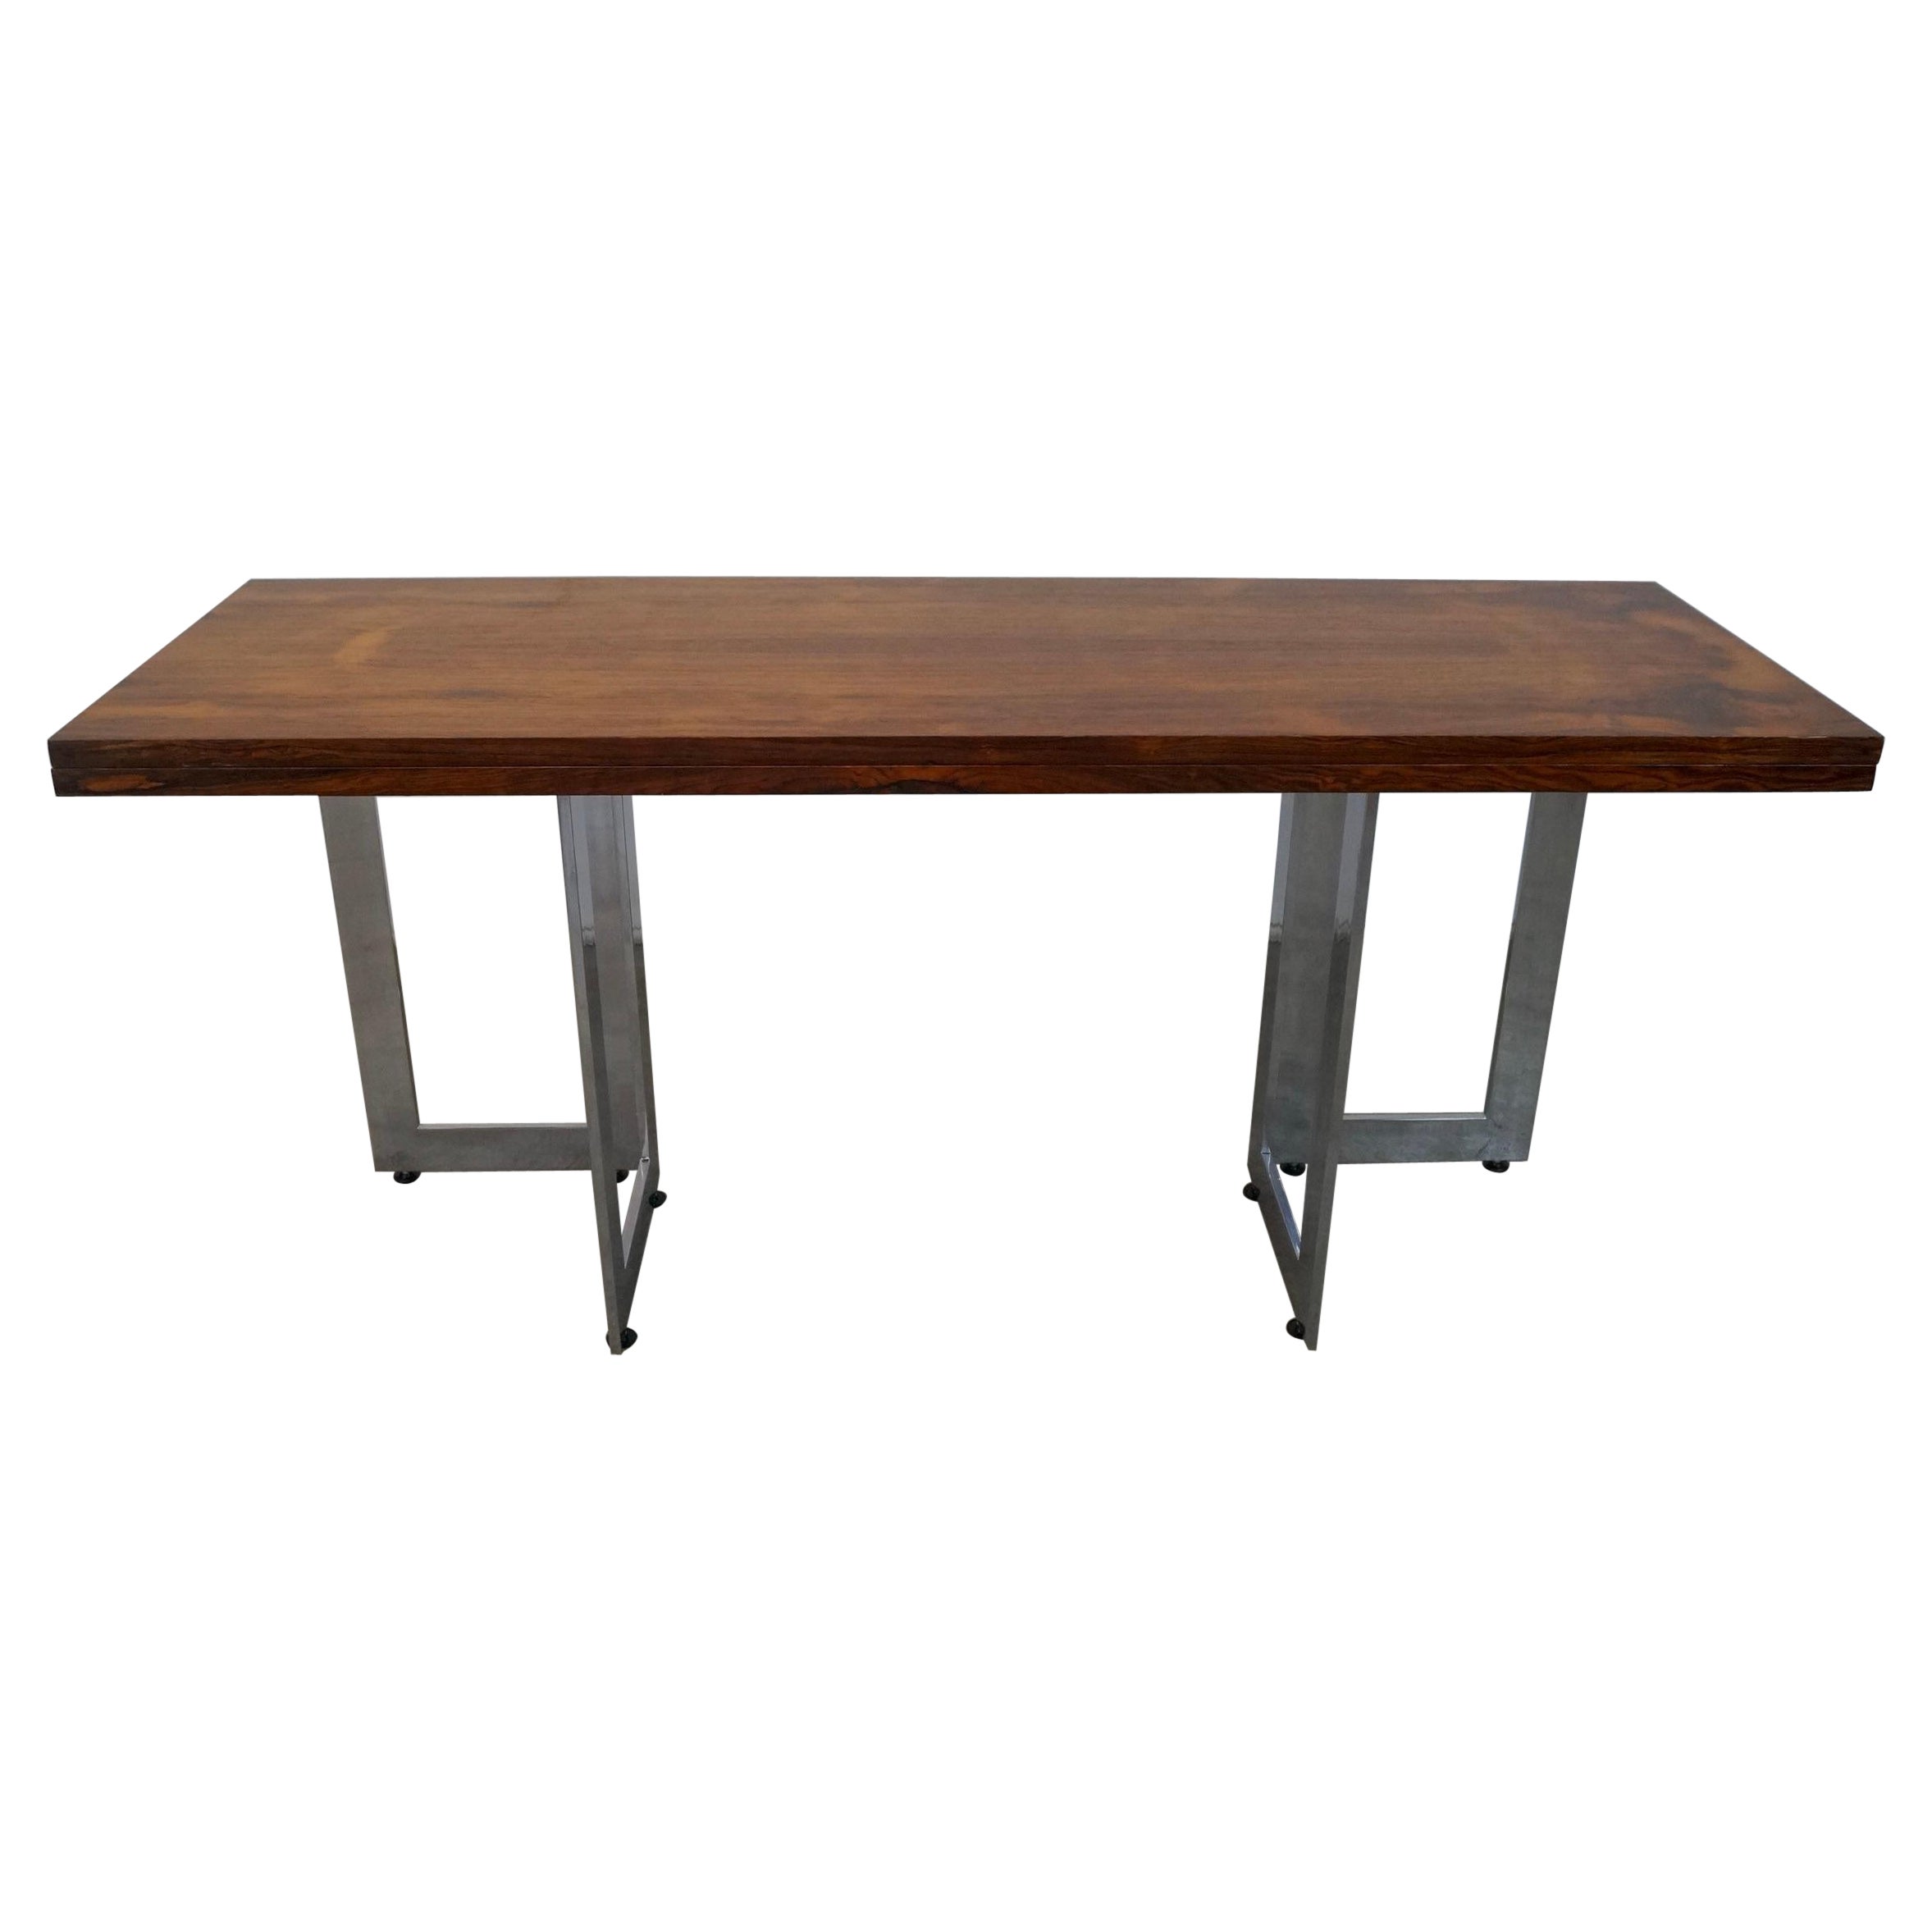 1970's Danish Modern Rosewood & Chrome Folding Dining Table / Console Table